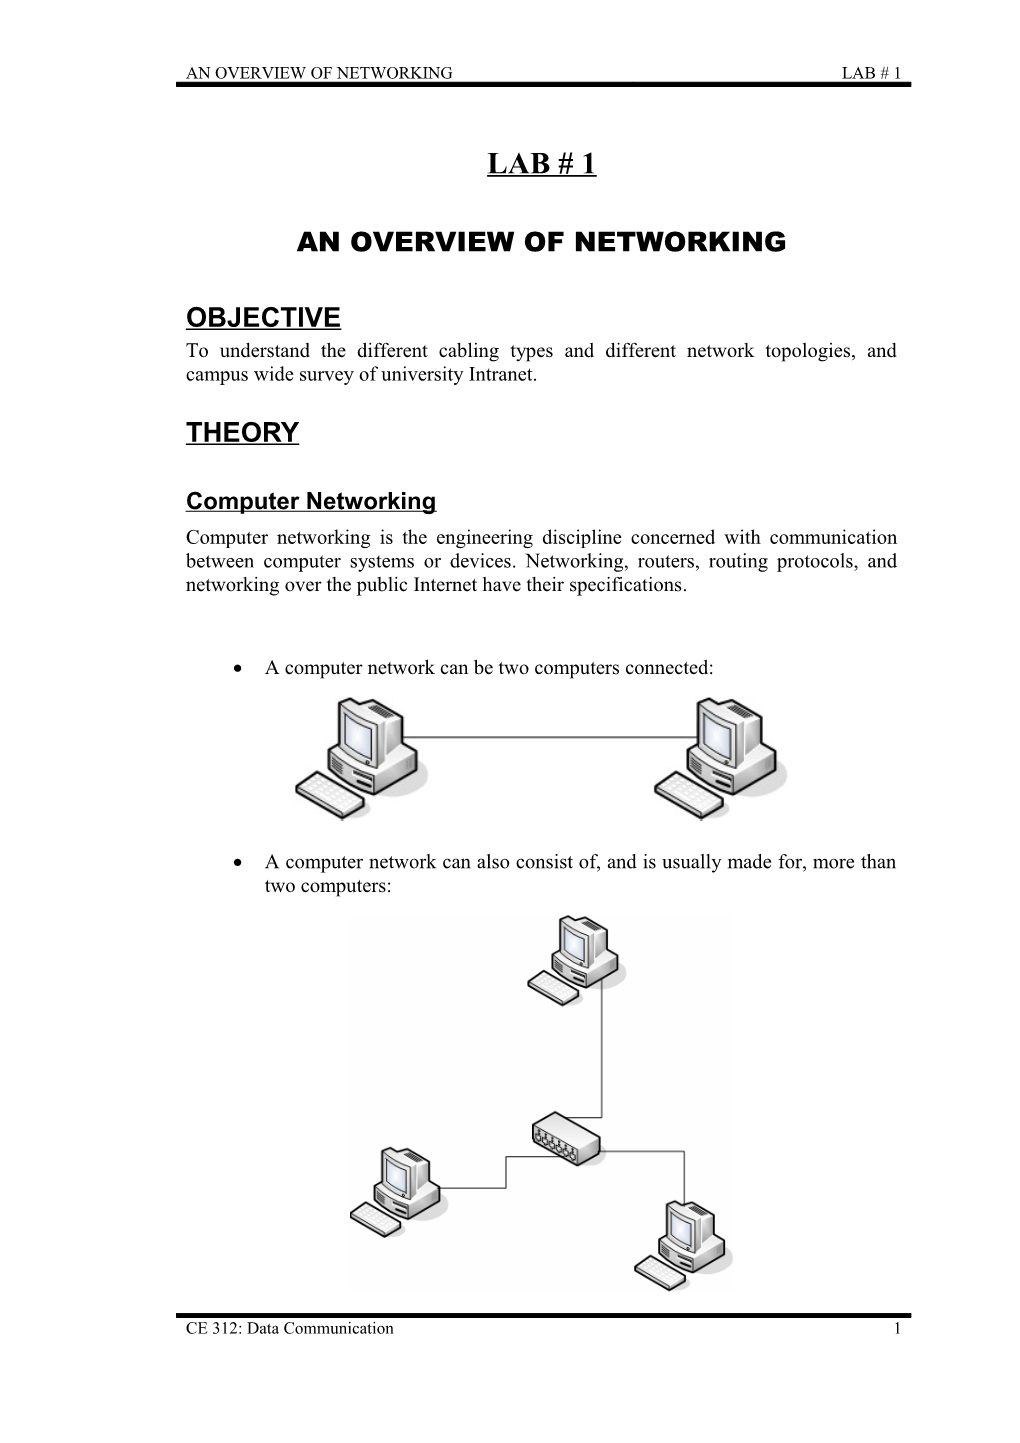 An Overview of Networking